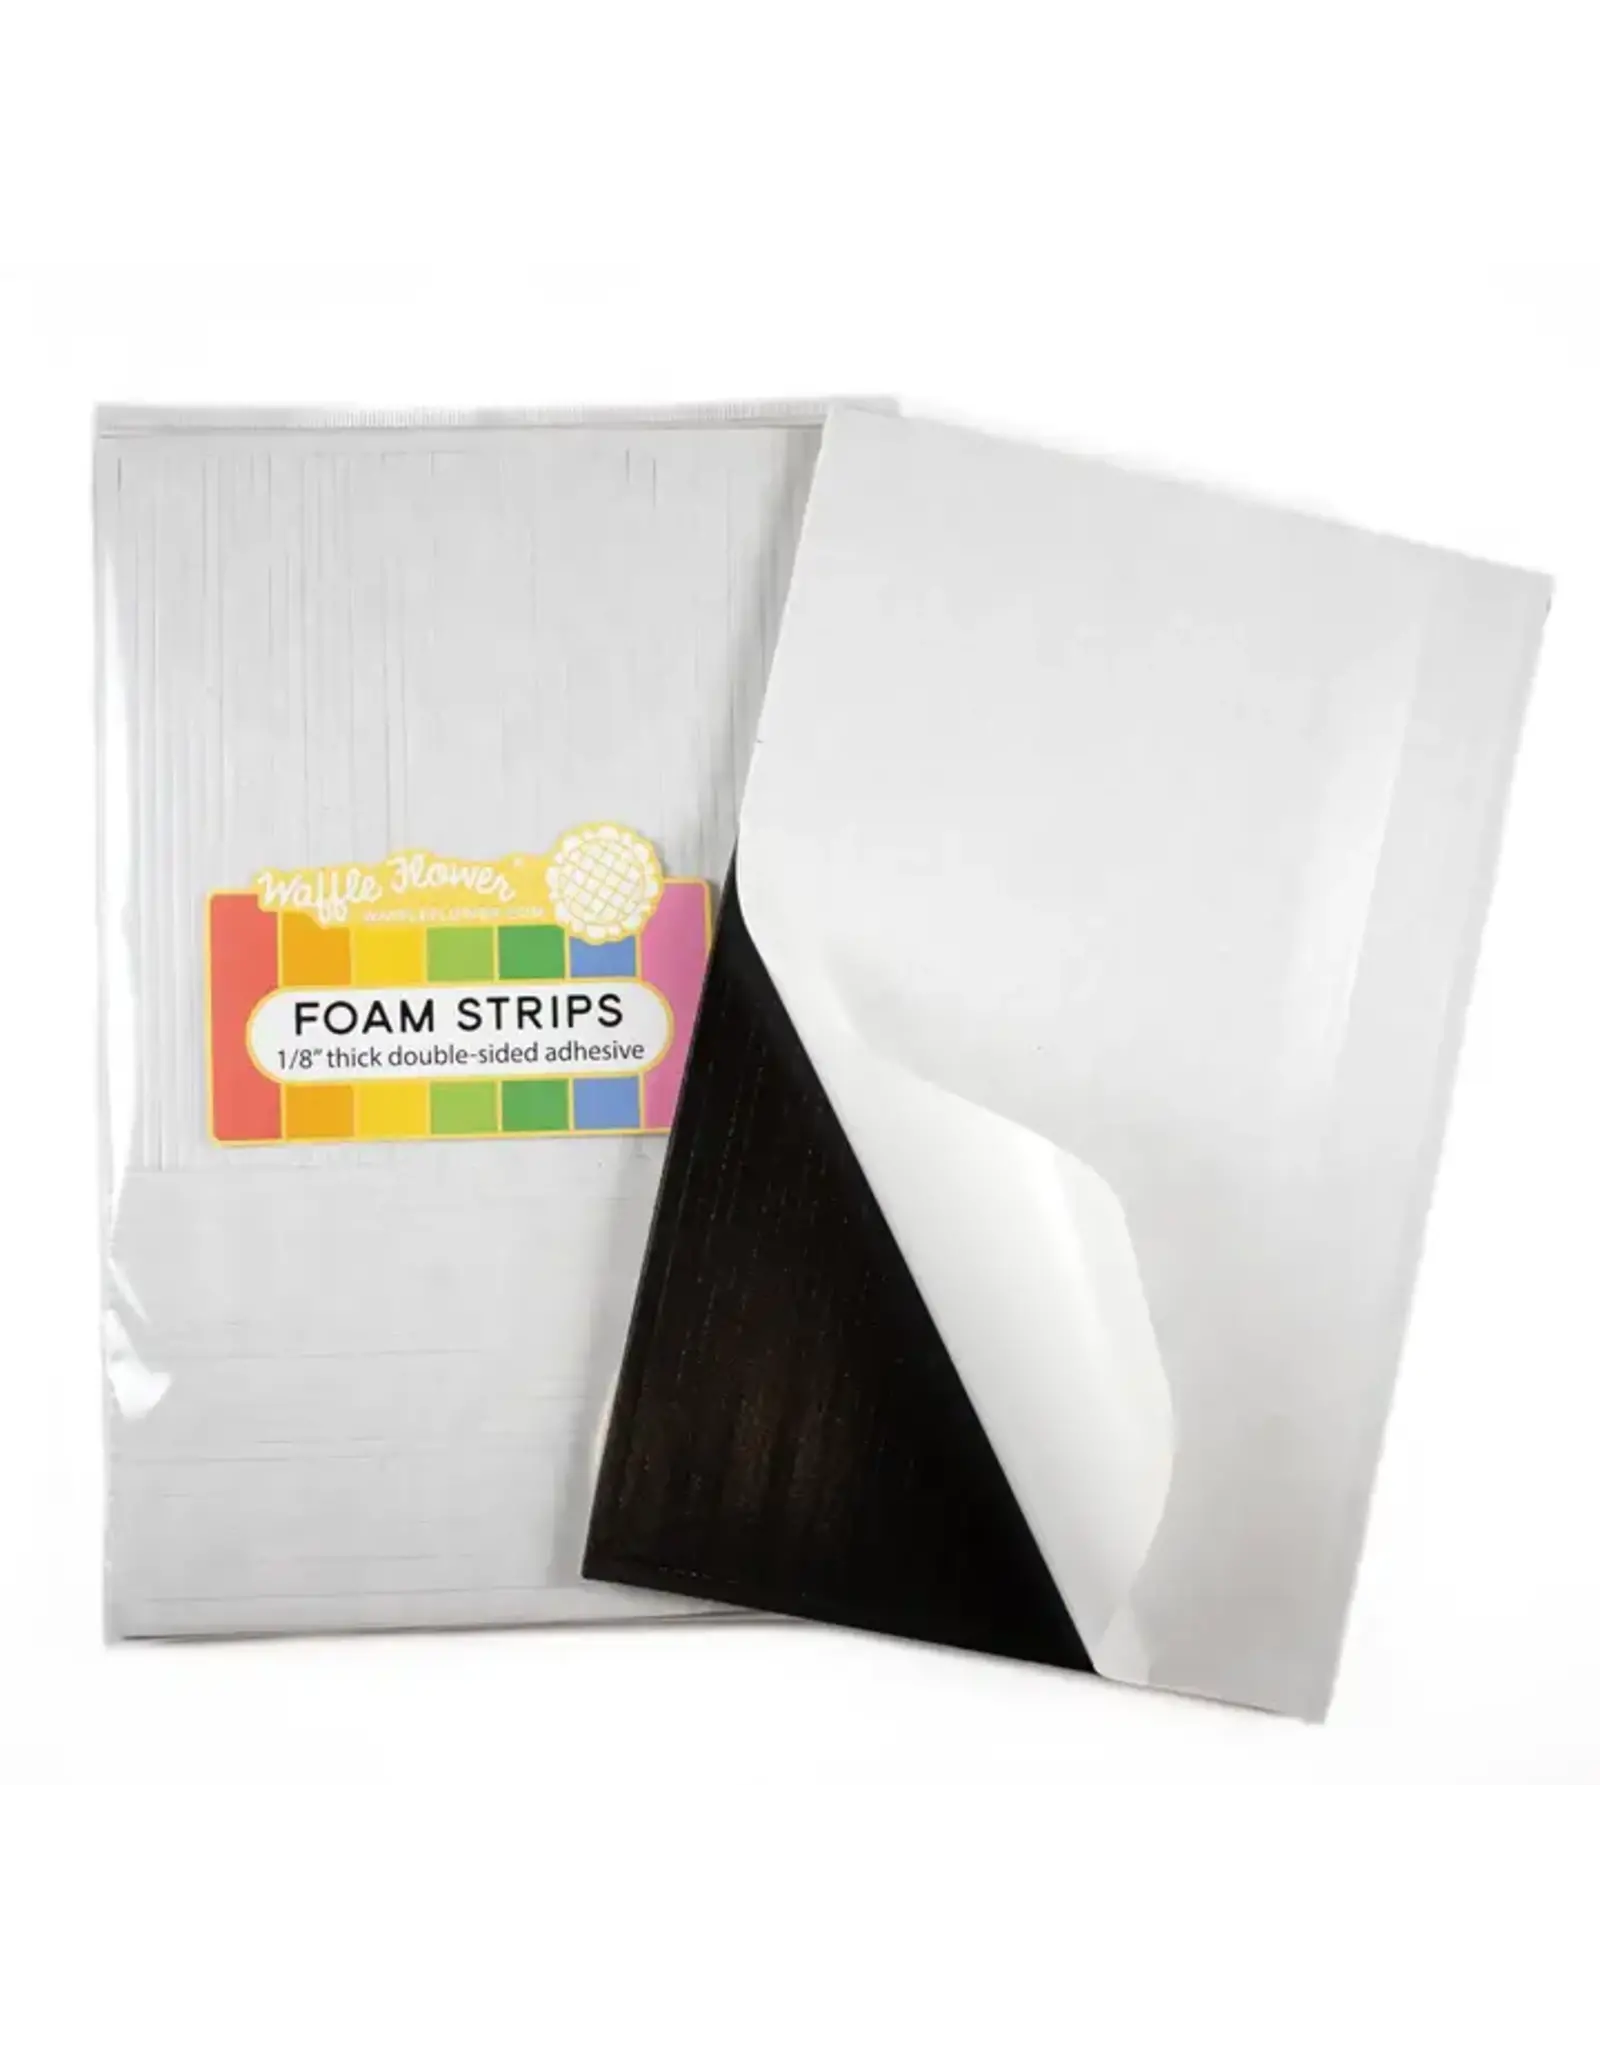 WAFFLE FLOWER WAFFLE FLOWER 1/8" THICK DOUBLE SIDED ADHESIVE BLACK FOAM STRIPS